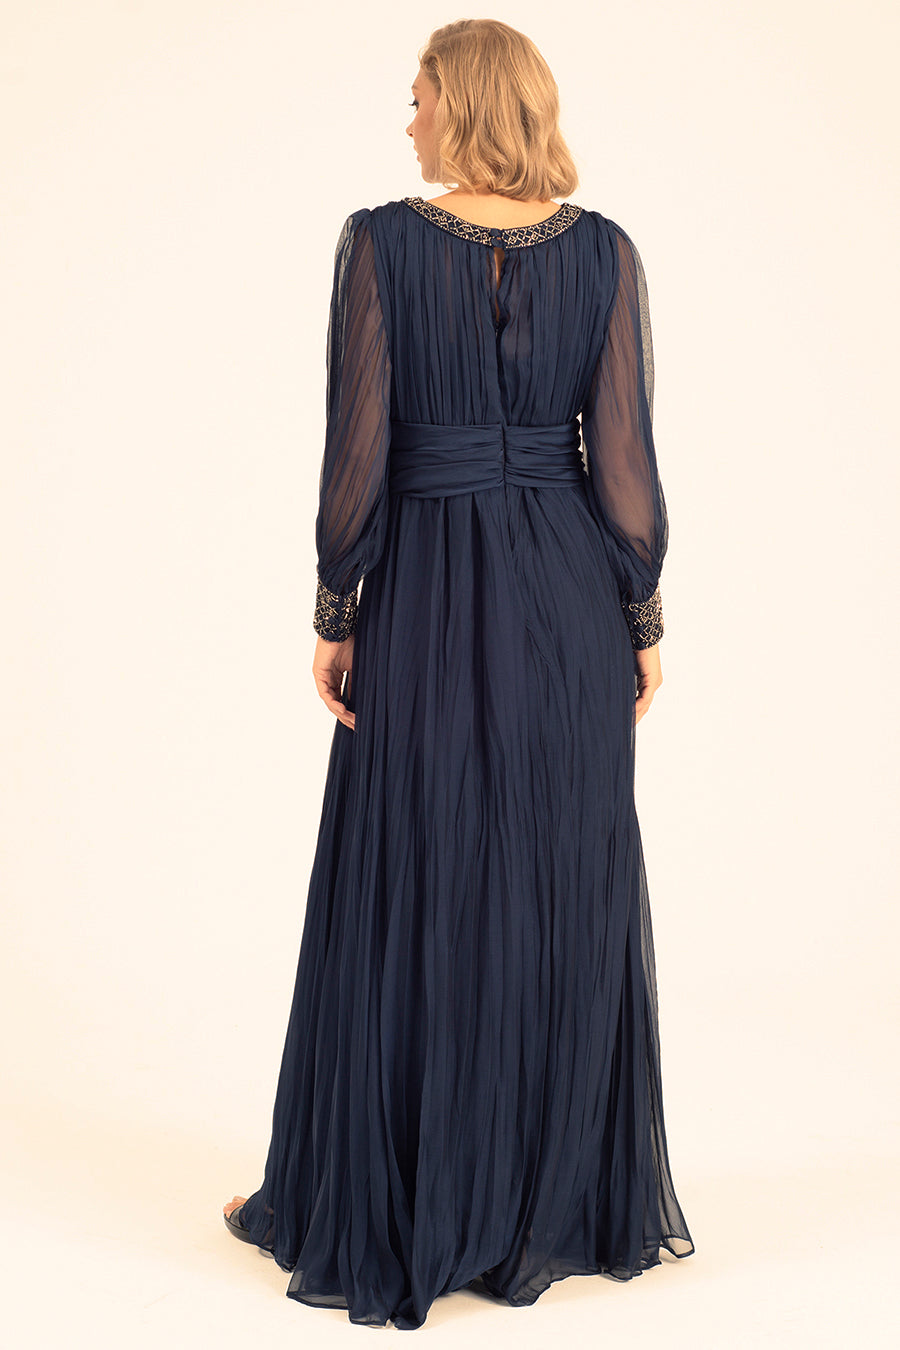 Sally - Mystic Evenings | Evening and Prom Dresses